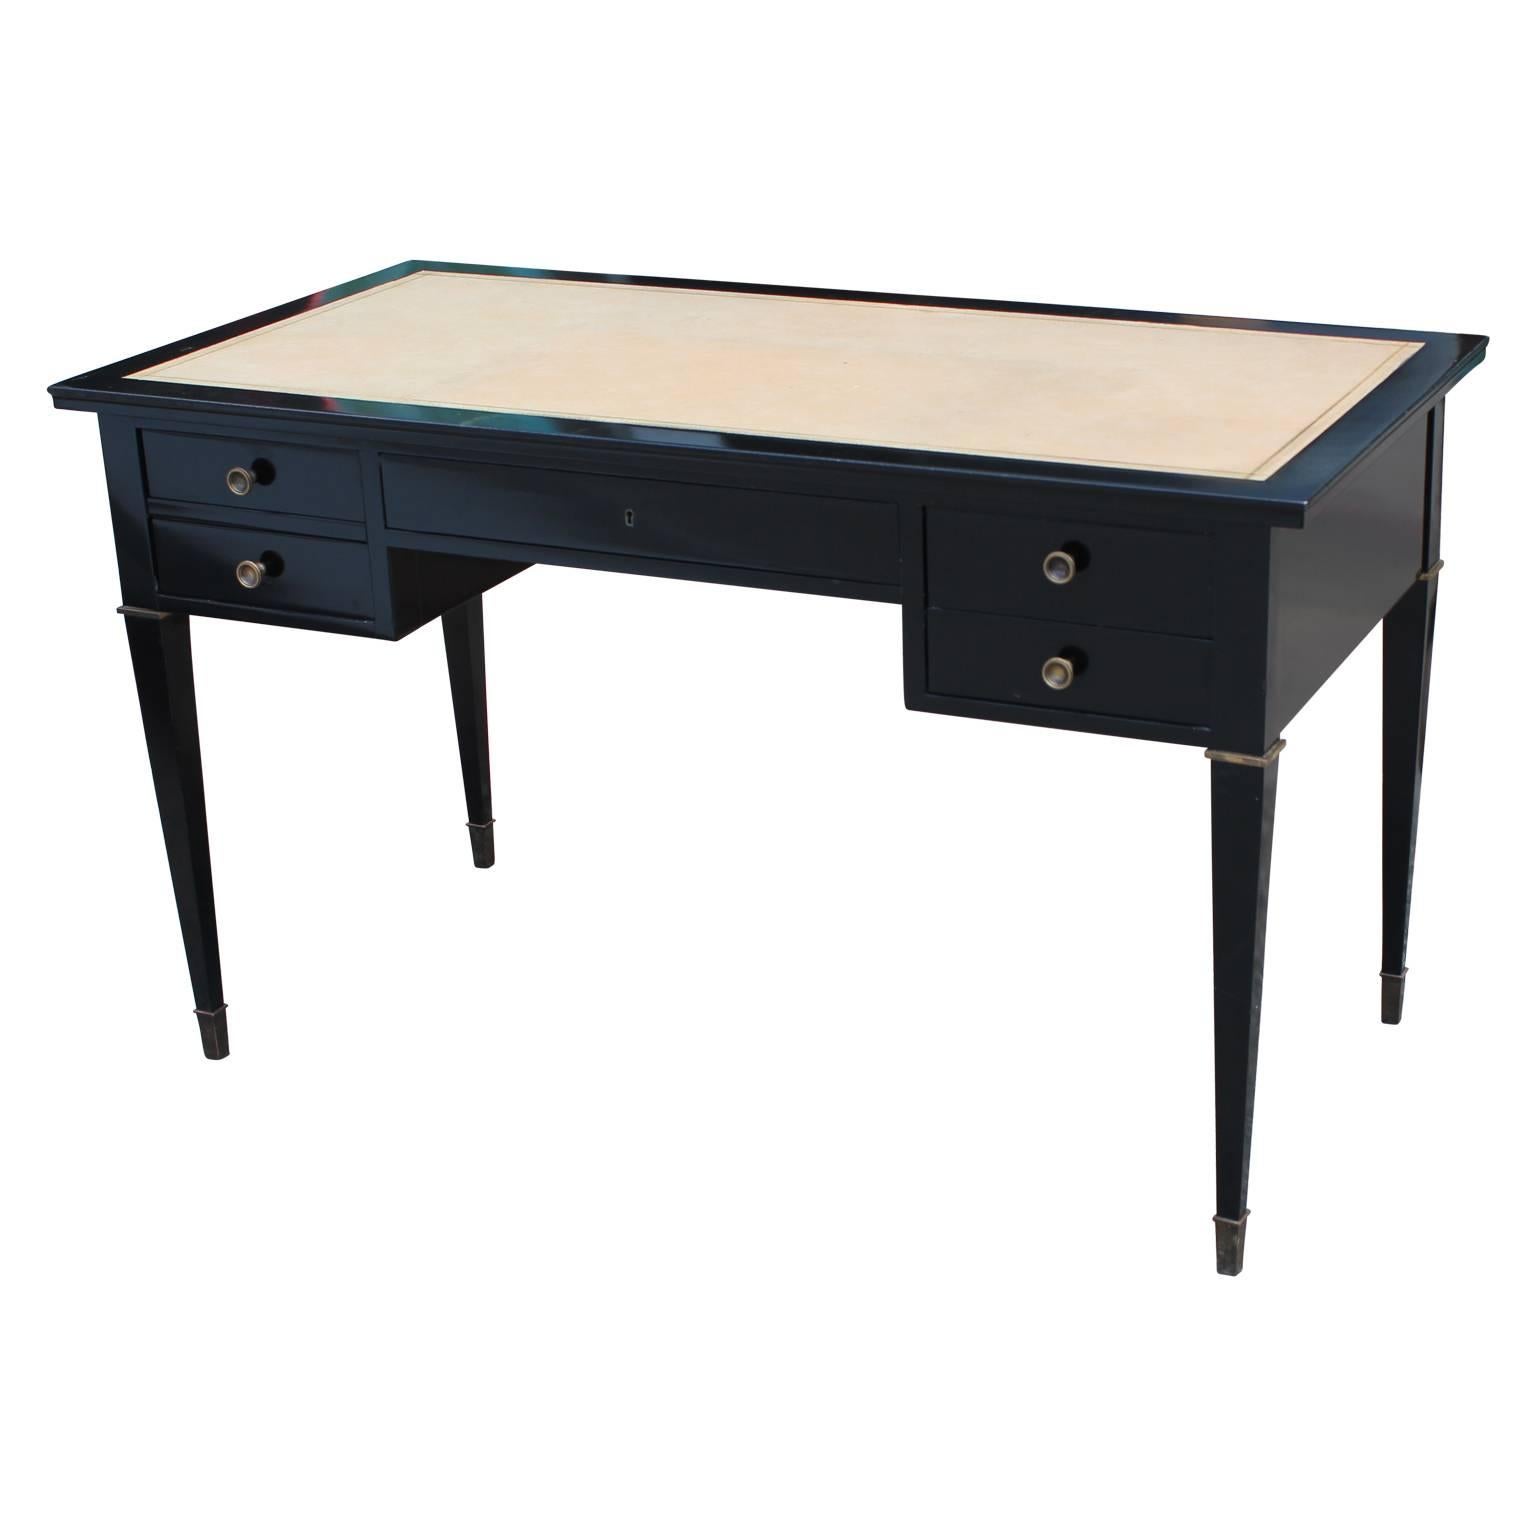 Maison Jansen style desk made in Argentina with a nice leather top. Piece was made with black lacquer and has nice brass handles.